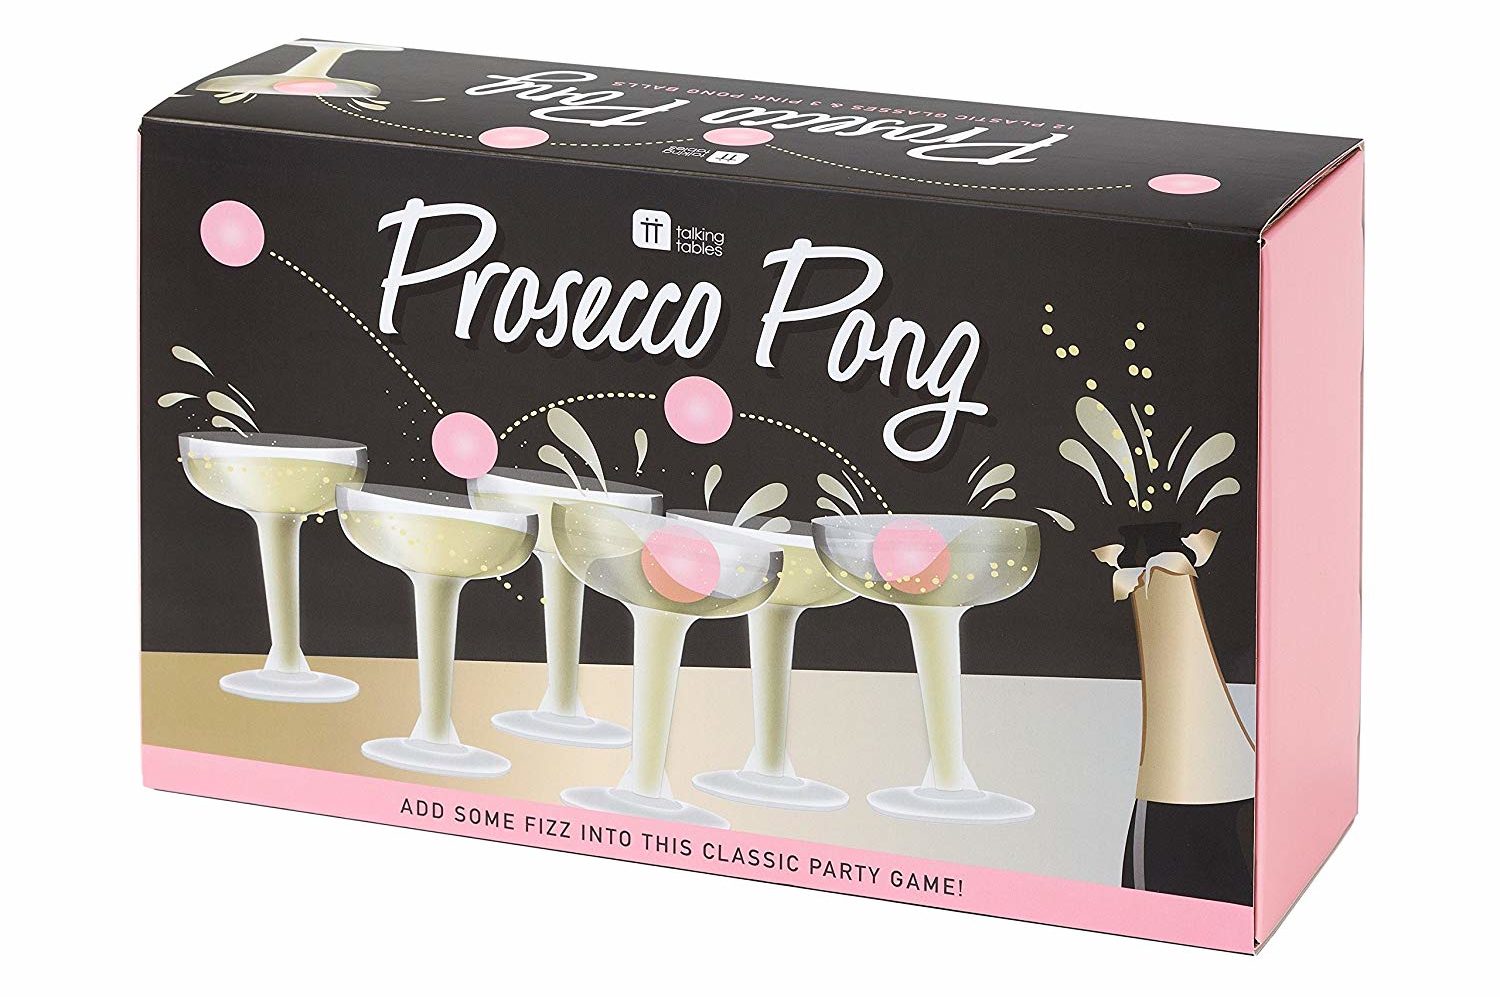 Best White Elephant Gift 2022: Prosecco Pong 2022